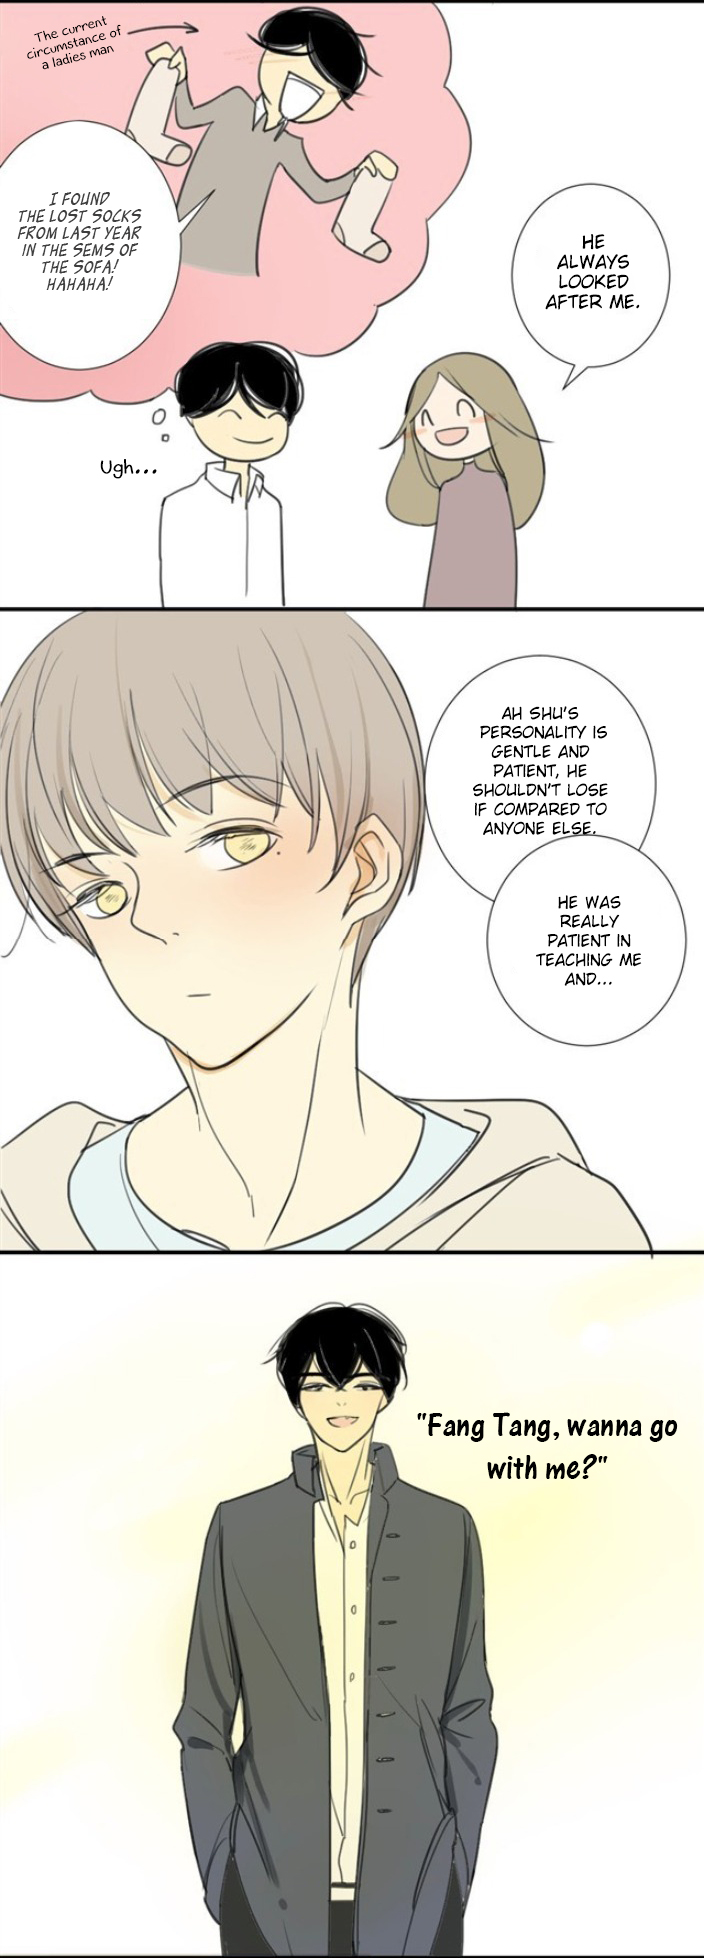 Classmate Relationship? Ch. 18 Ah Shu's also staying at Senior's house?